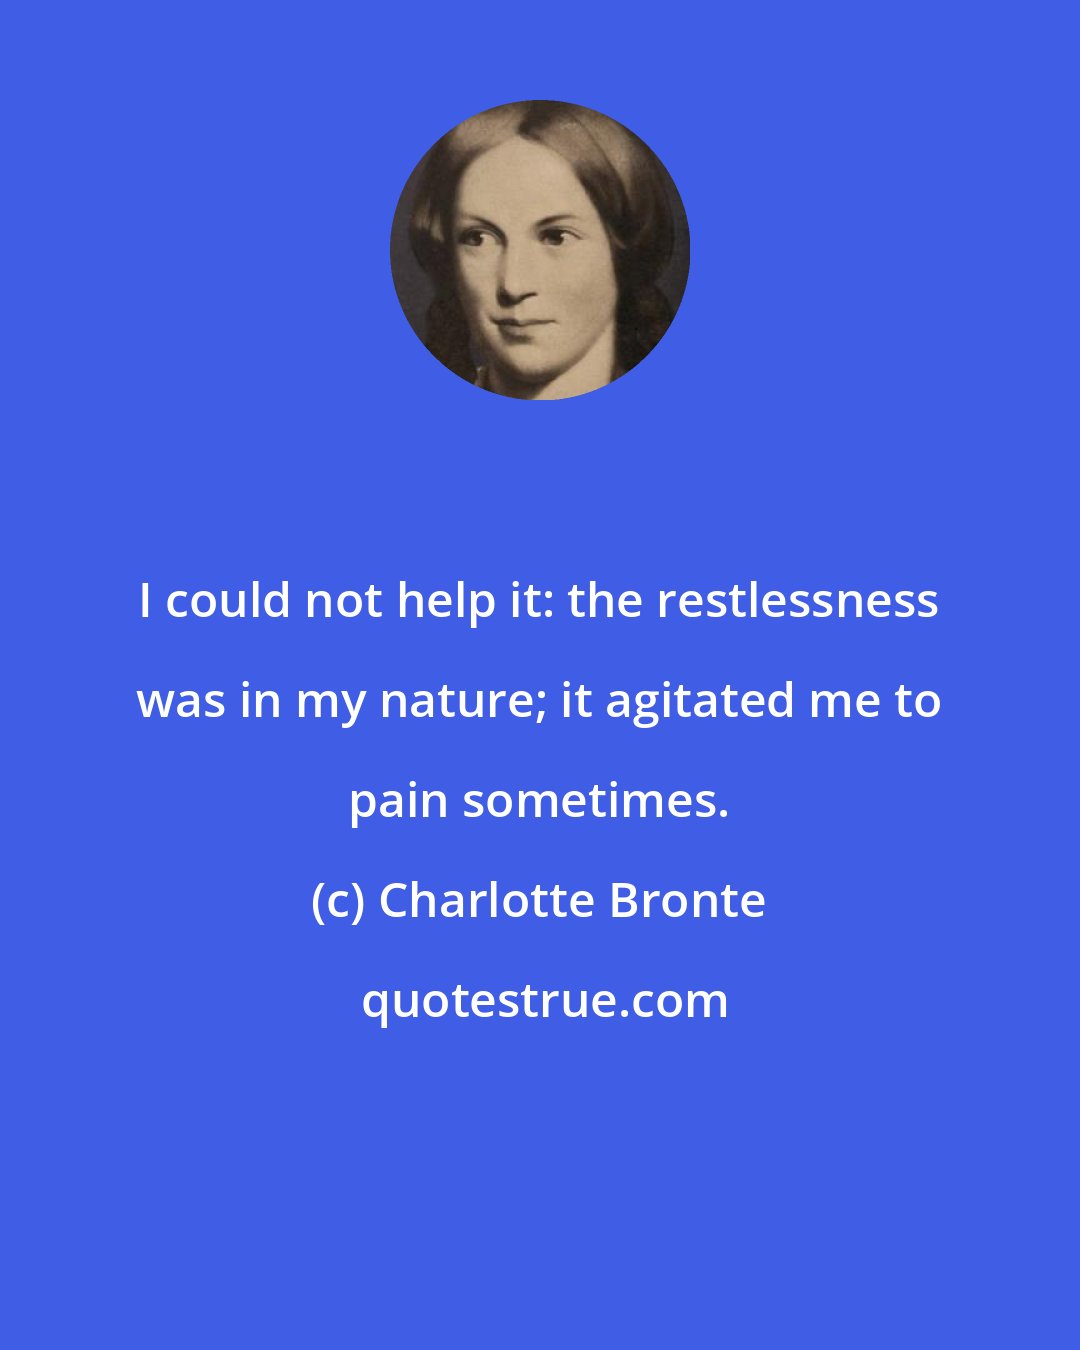 Charlotte Bronte: I could not help it: the restlessness was in my nature; it agitated me to pain sometimes.